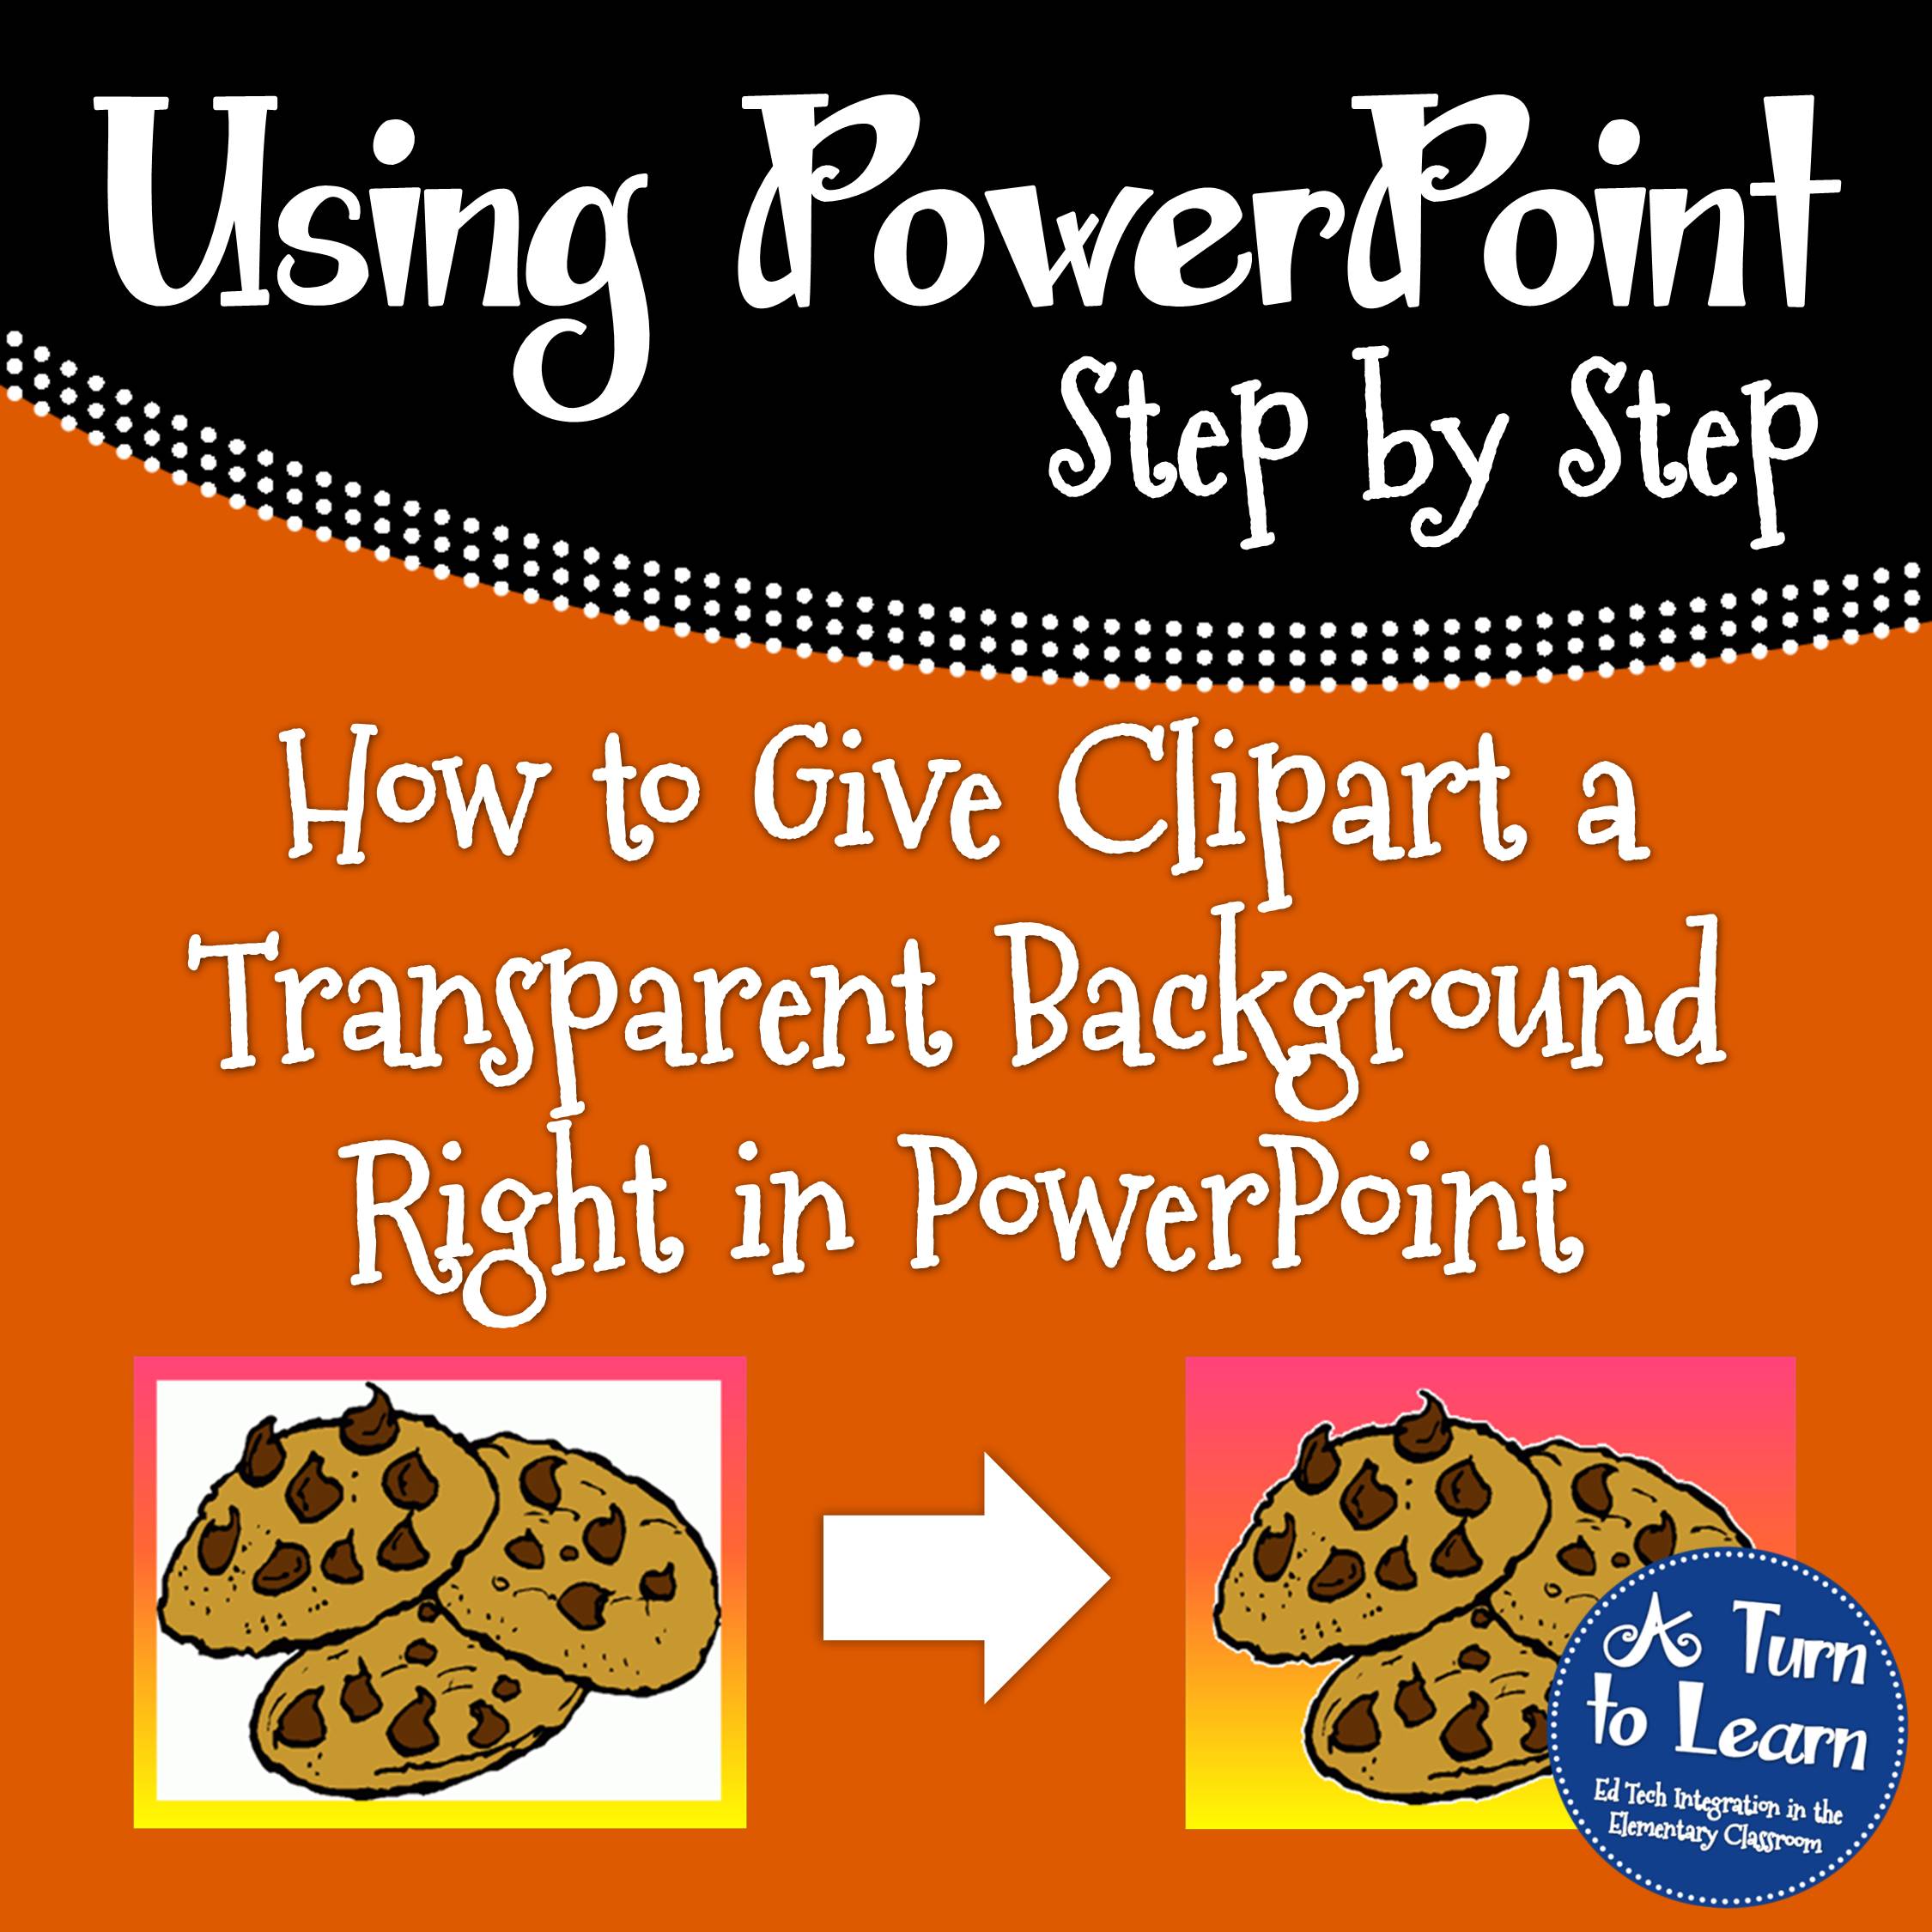 How To Get Clipart With Transparent Background - KibrisPDR